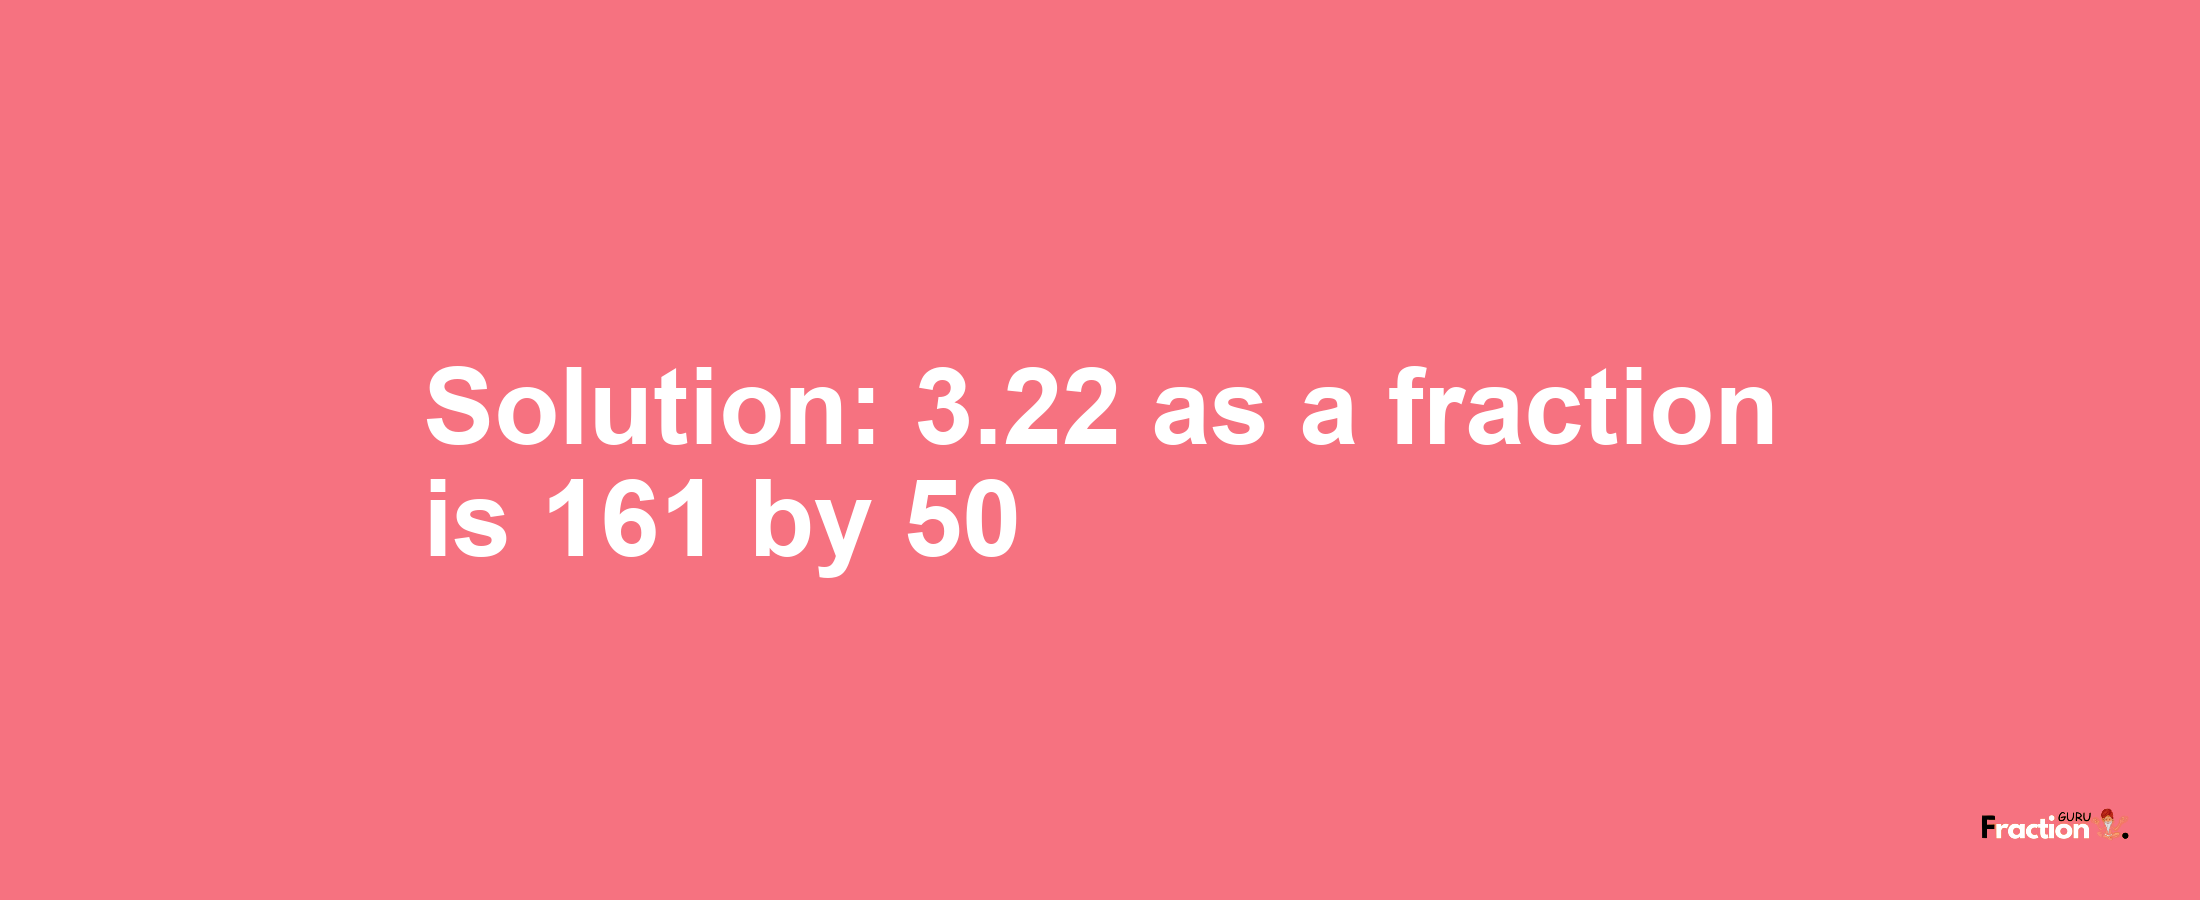 Solution:3.22 as a fraction is 161/50